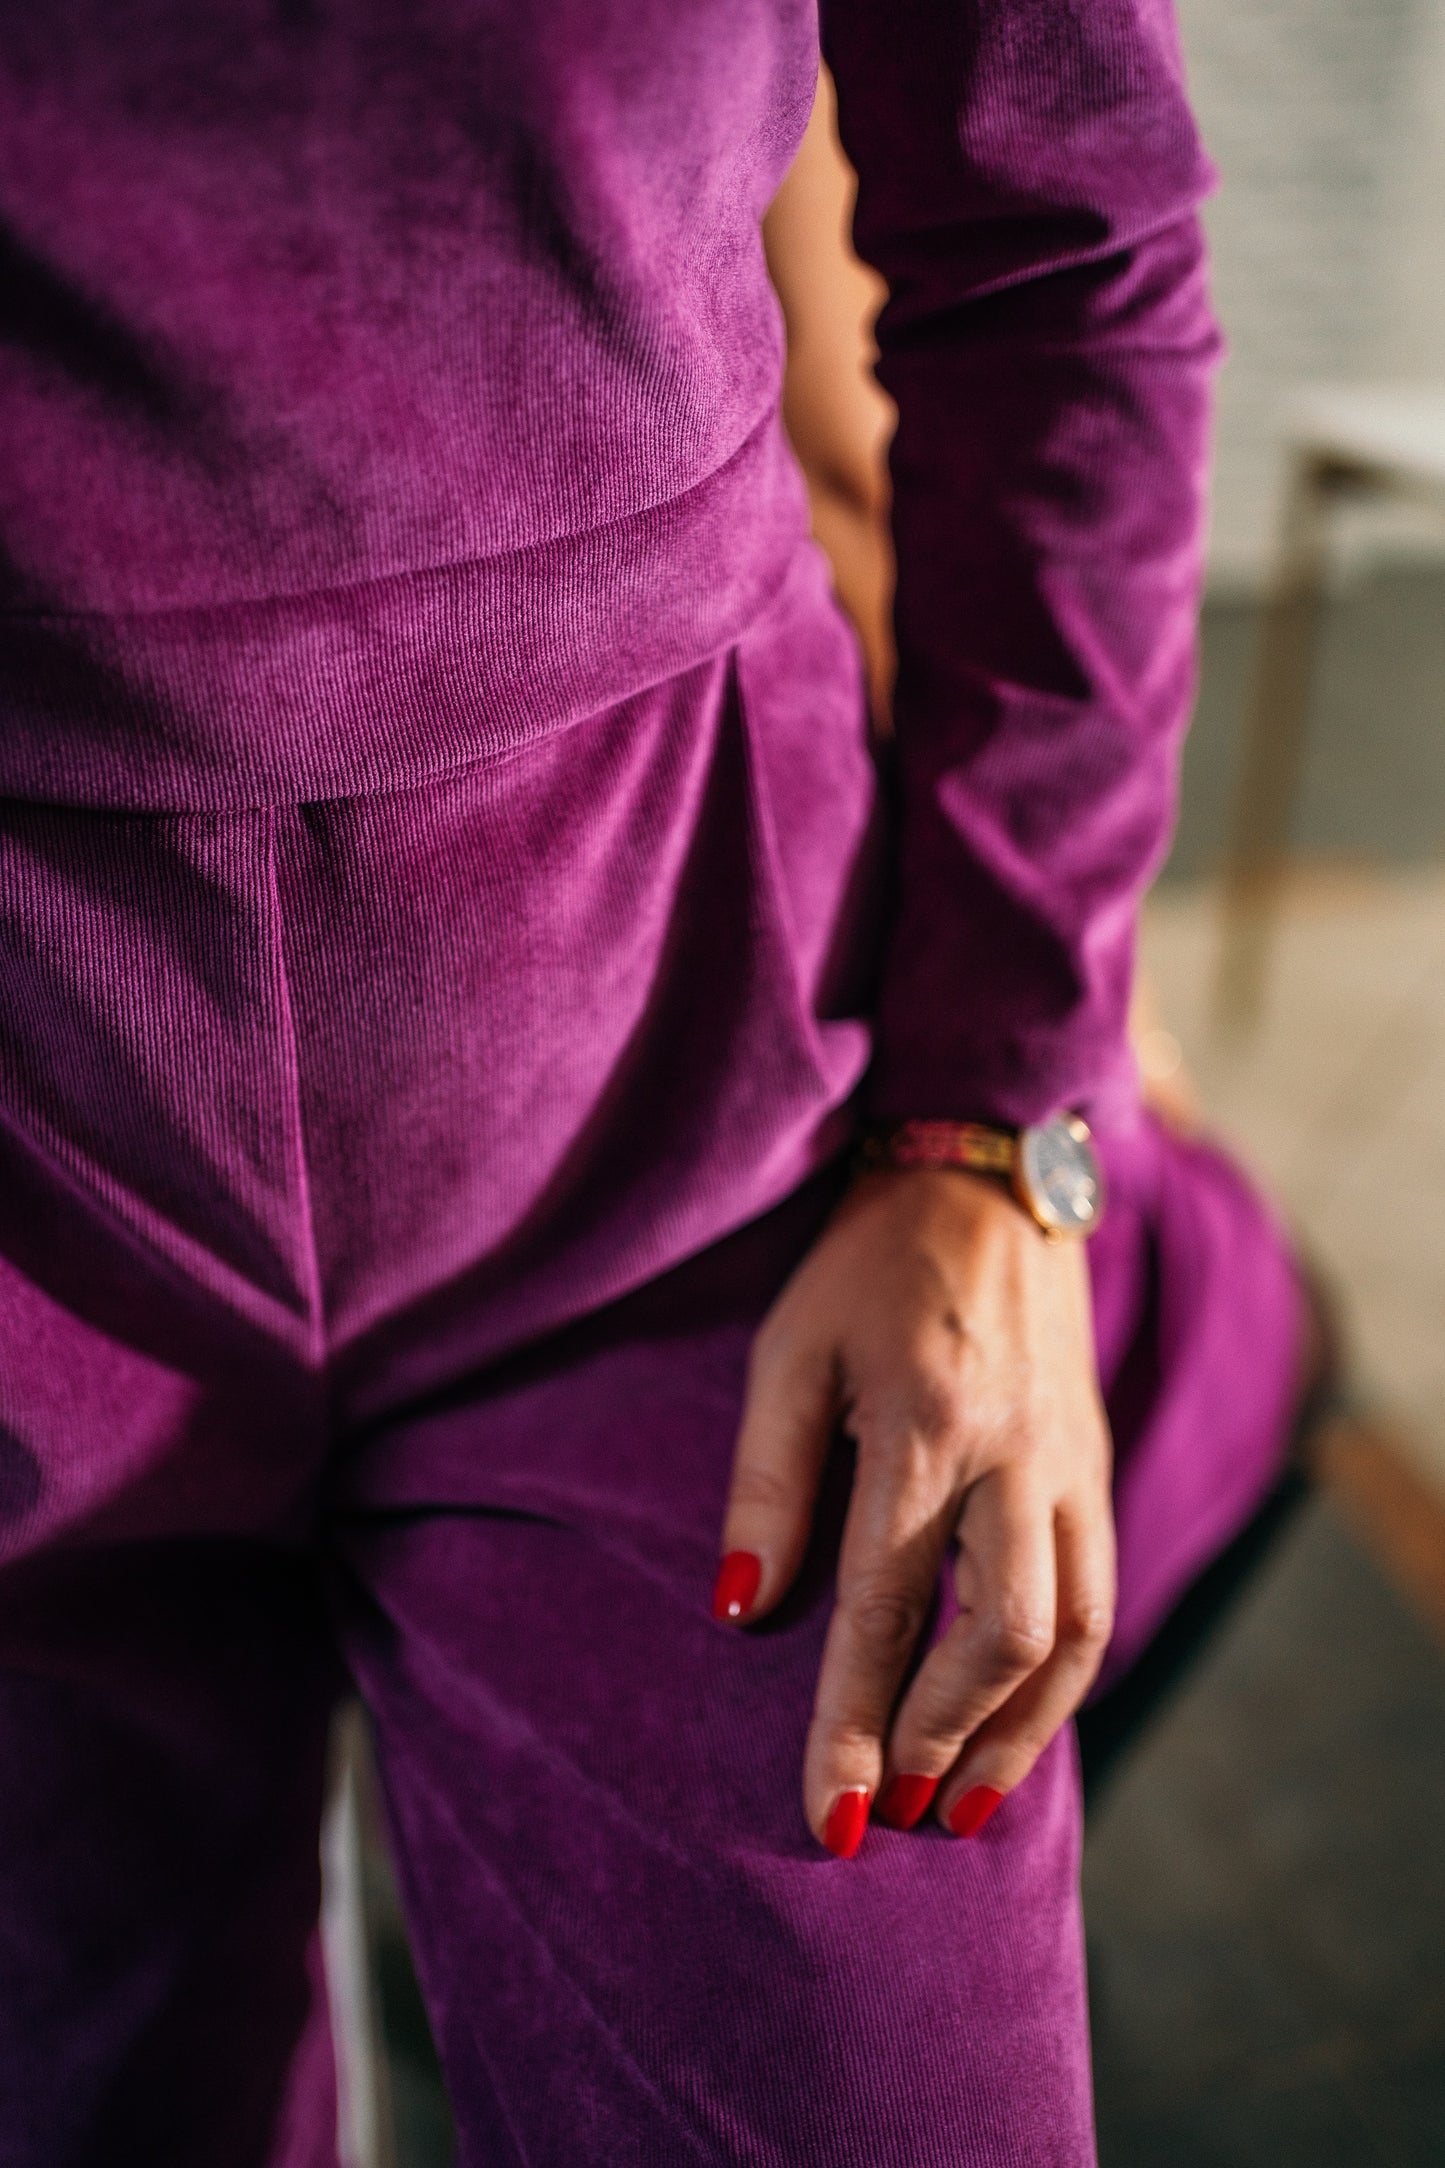 Classic style magenta pants with pockets